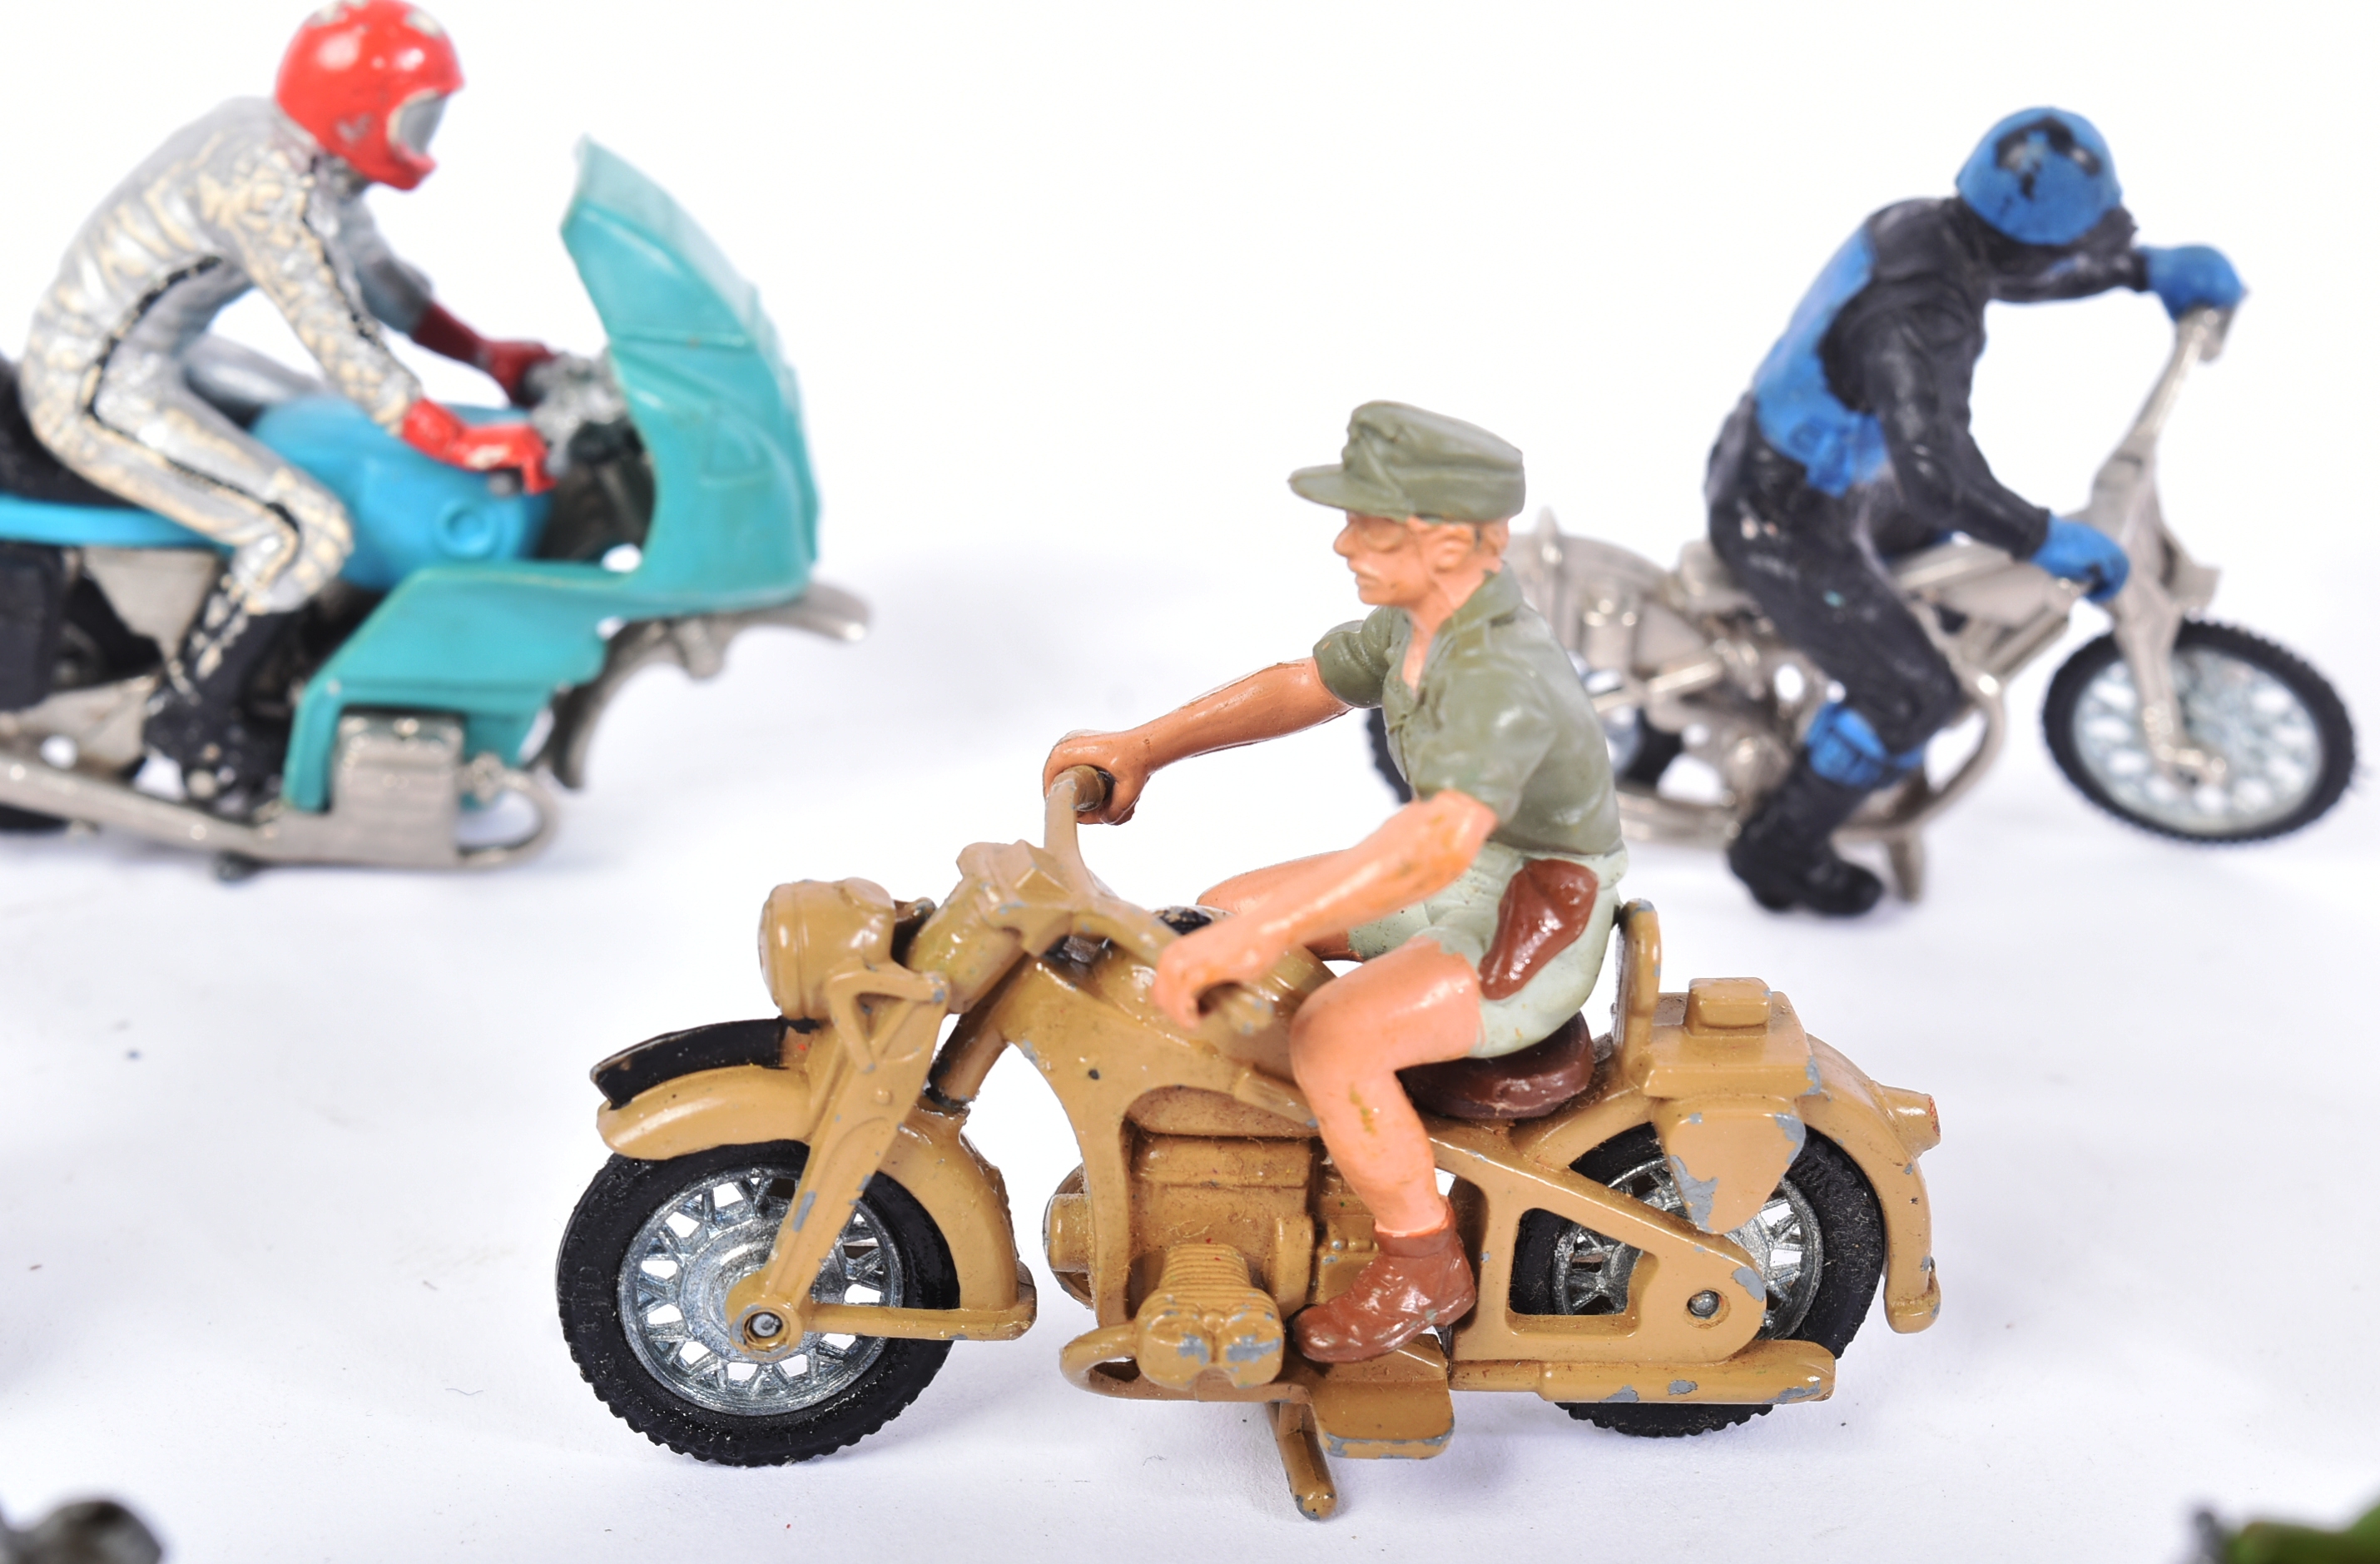 COLLECTION OF VINTAGE BRITAINS MOTORCYCLES - Image 3 of 5